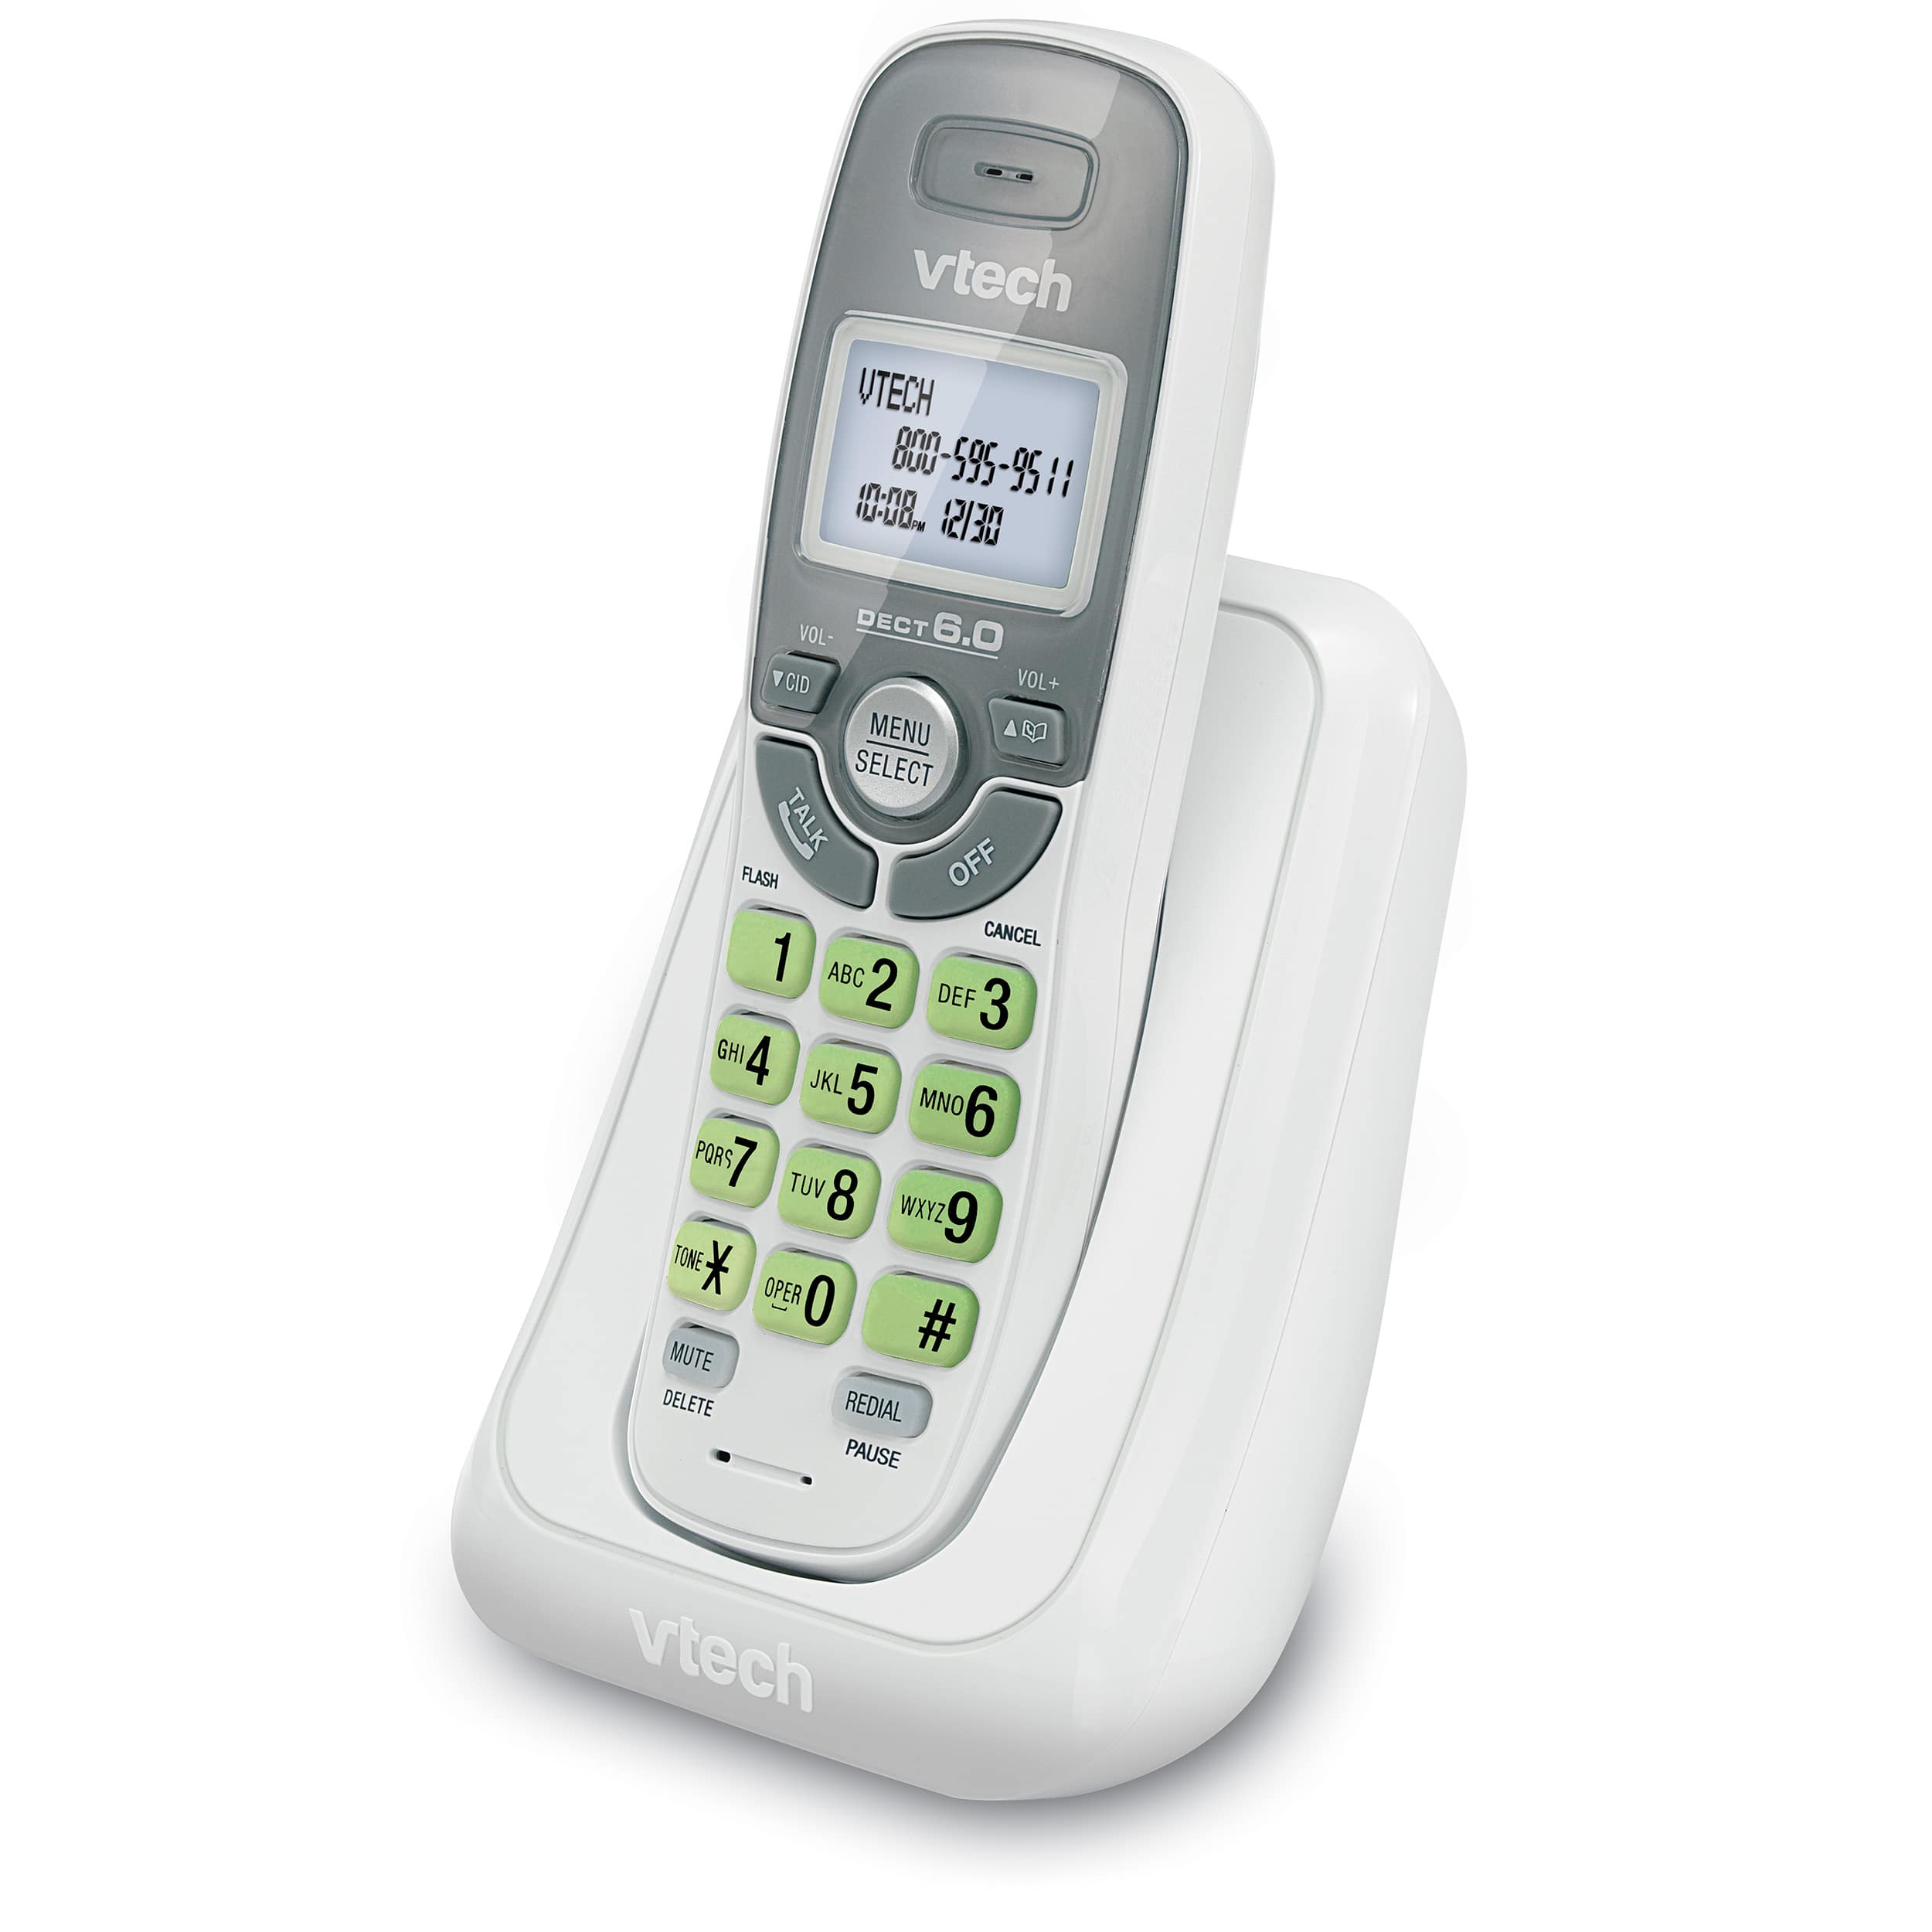 VTech DECT 6.0 Cordless Phone with Answering Machine, Blue-White Display,  Backlit Buttons, Full Duplex Speaker, Caller ID/Call Waiting, 1000 ft Range